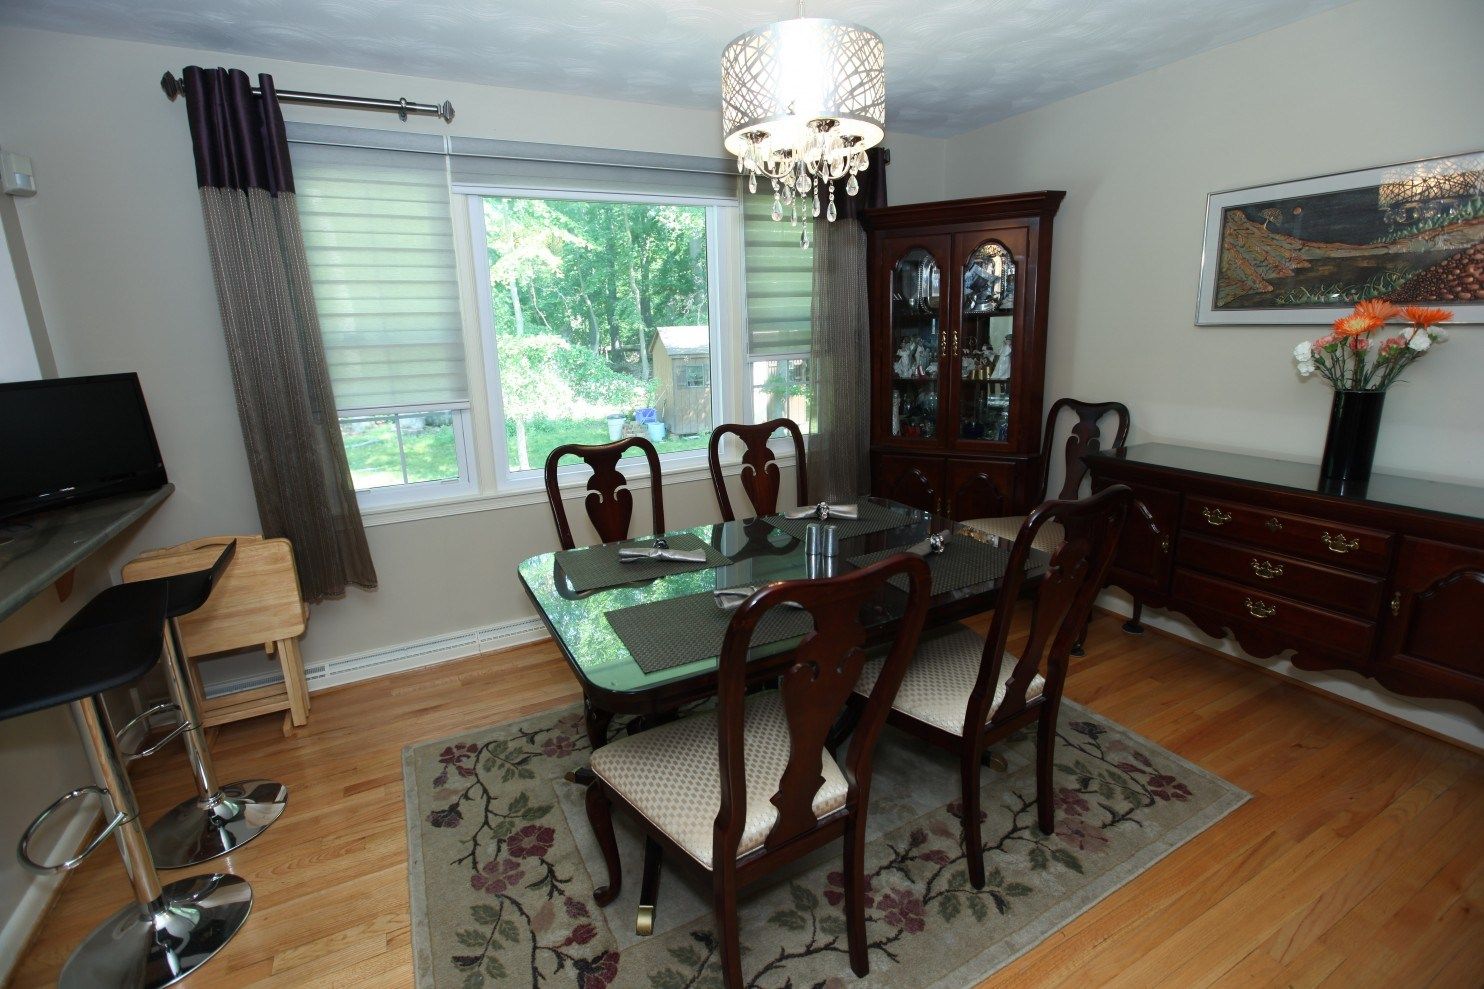 House Calls: Dressing up a dining room